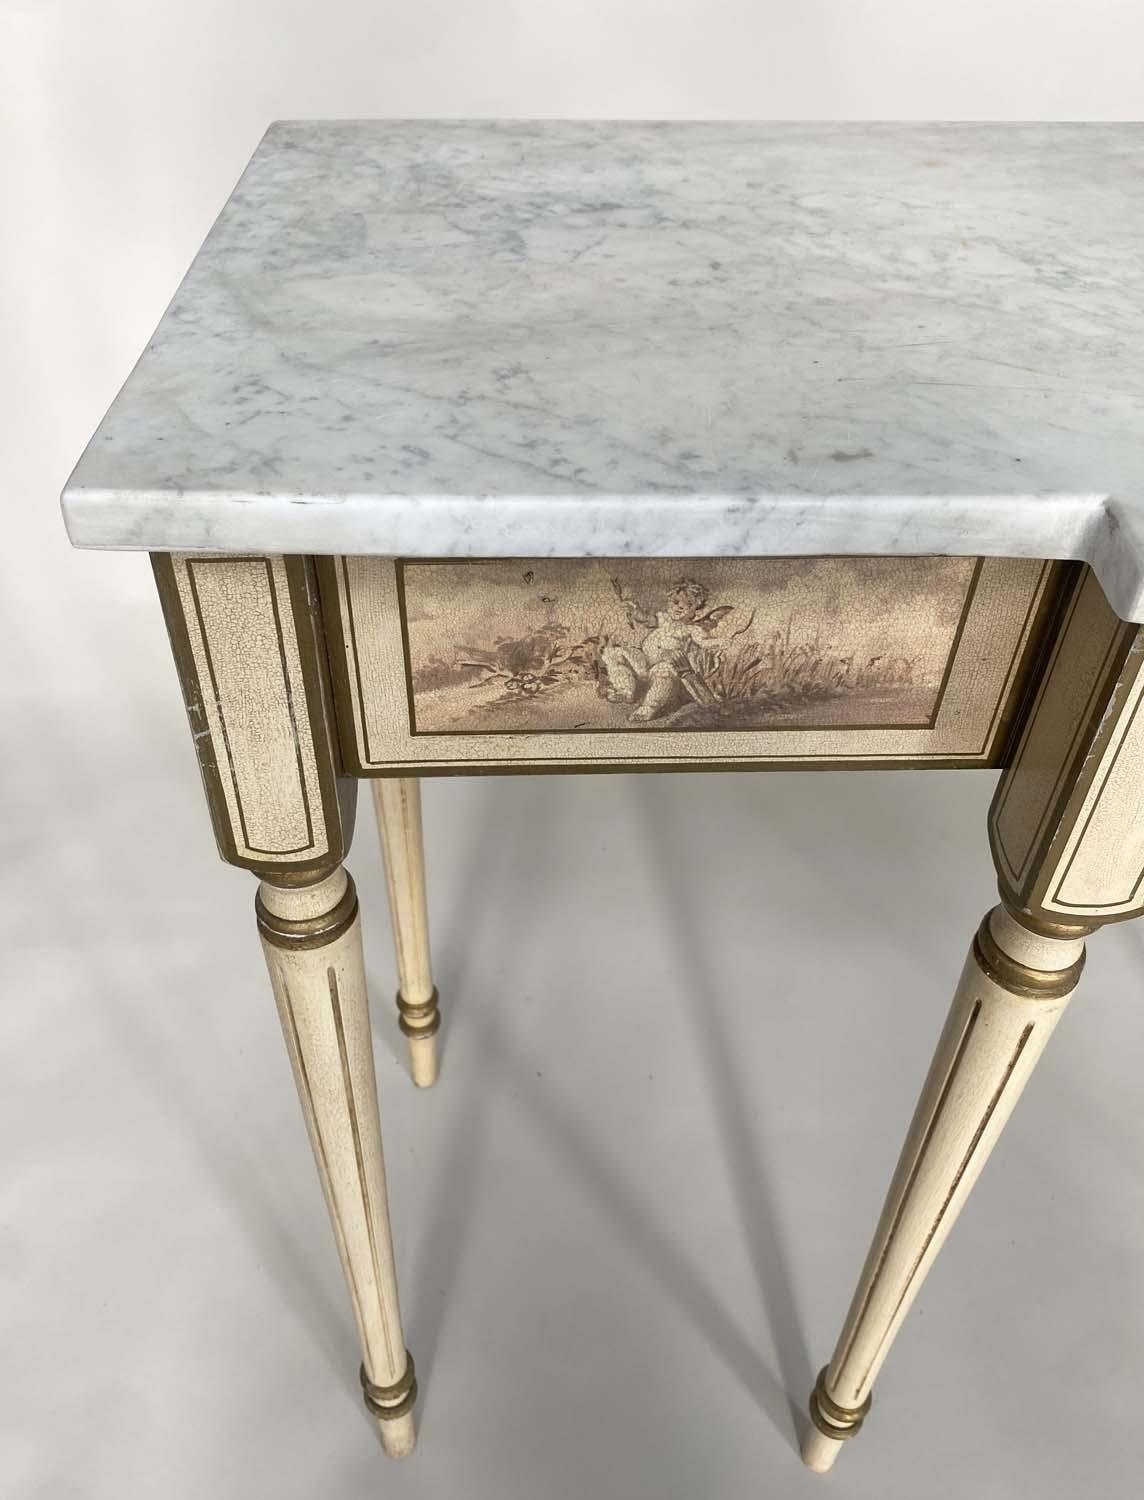 CONSOLE TABLE, Italian style breakfront form with Carrara marble top, cherub painted frieze and - Image 6 of 8